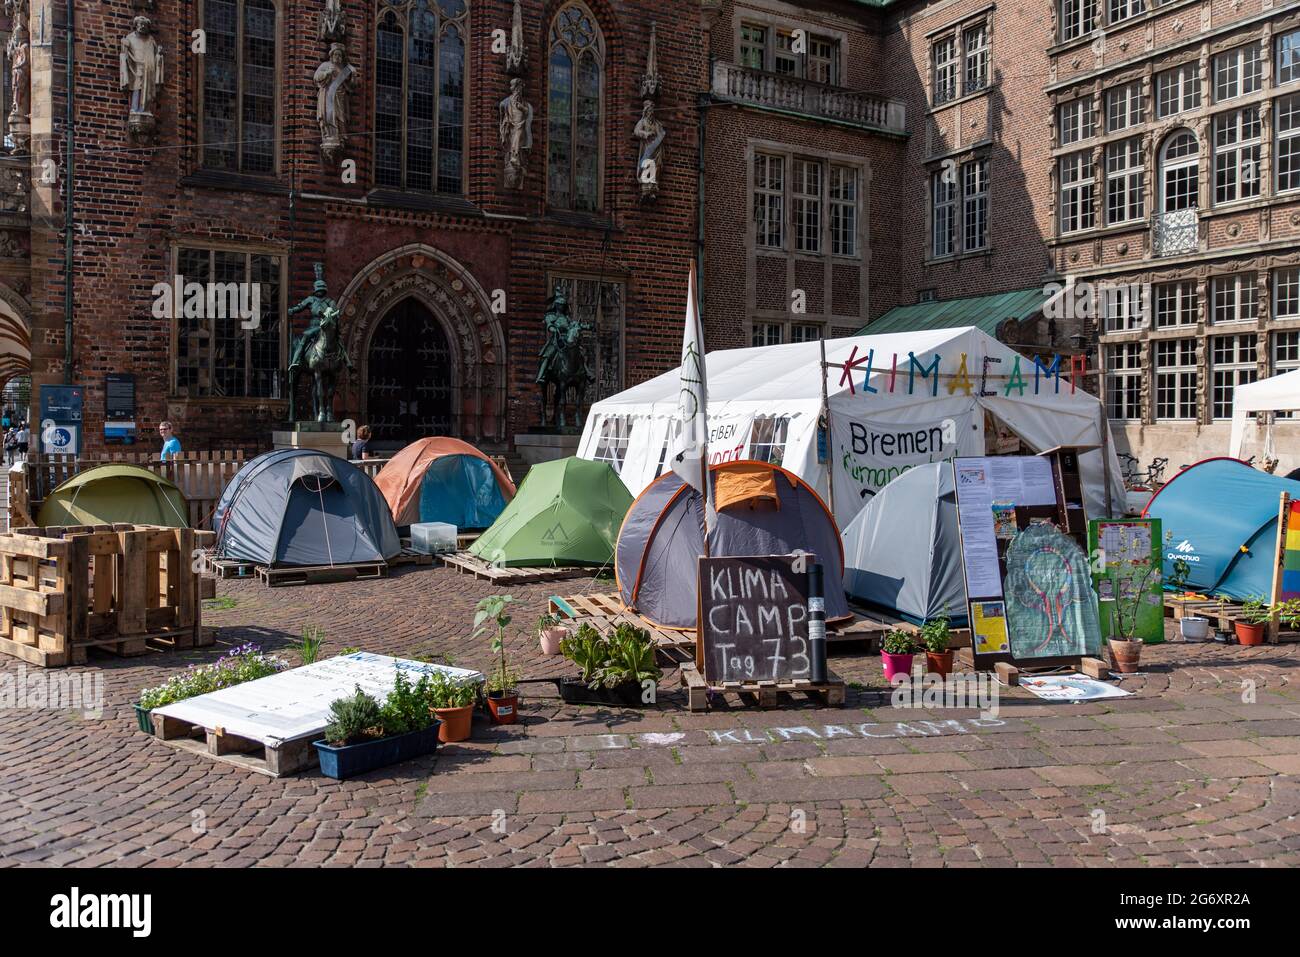 07.04.2021 Climate Camp In Front Of The Town Hall In Bremen. Climate Activist Build Up The Climatecamp To Protest For More Climate Protection In Breme Stock Photo